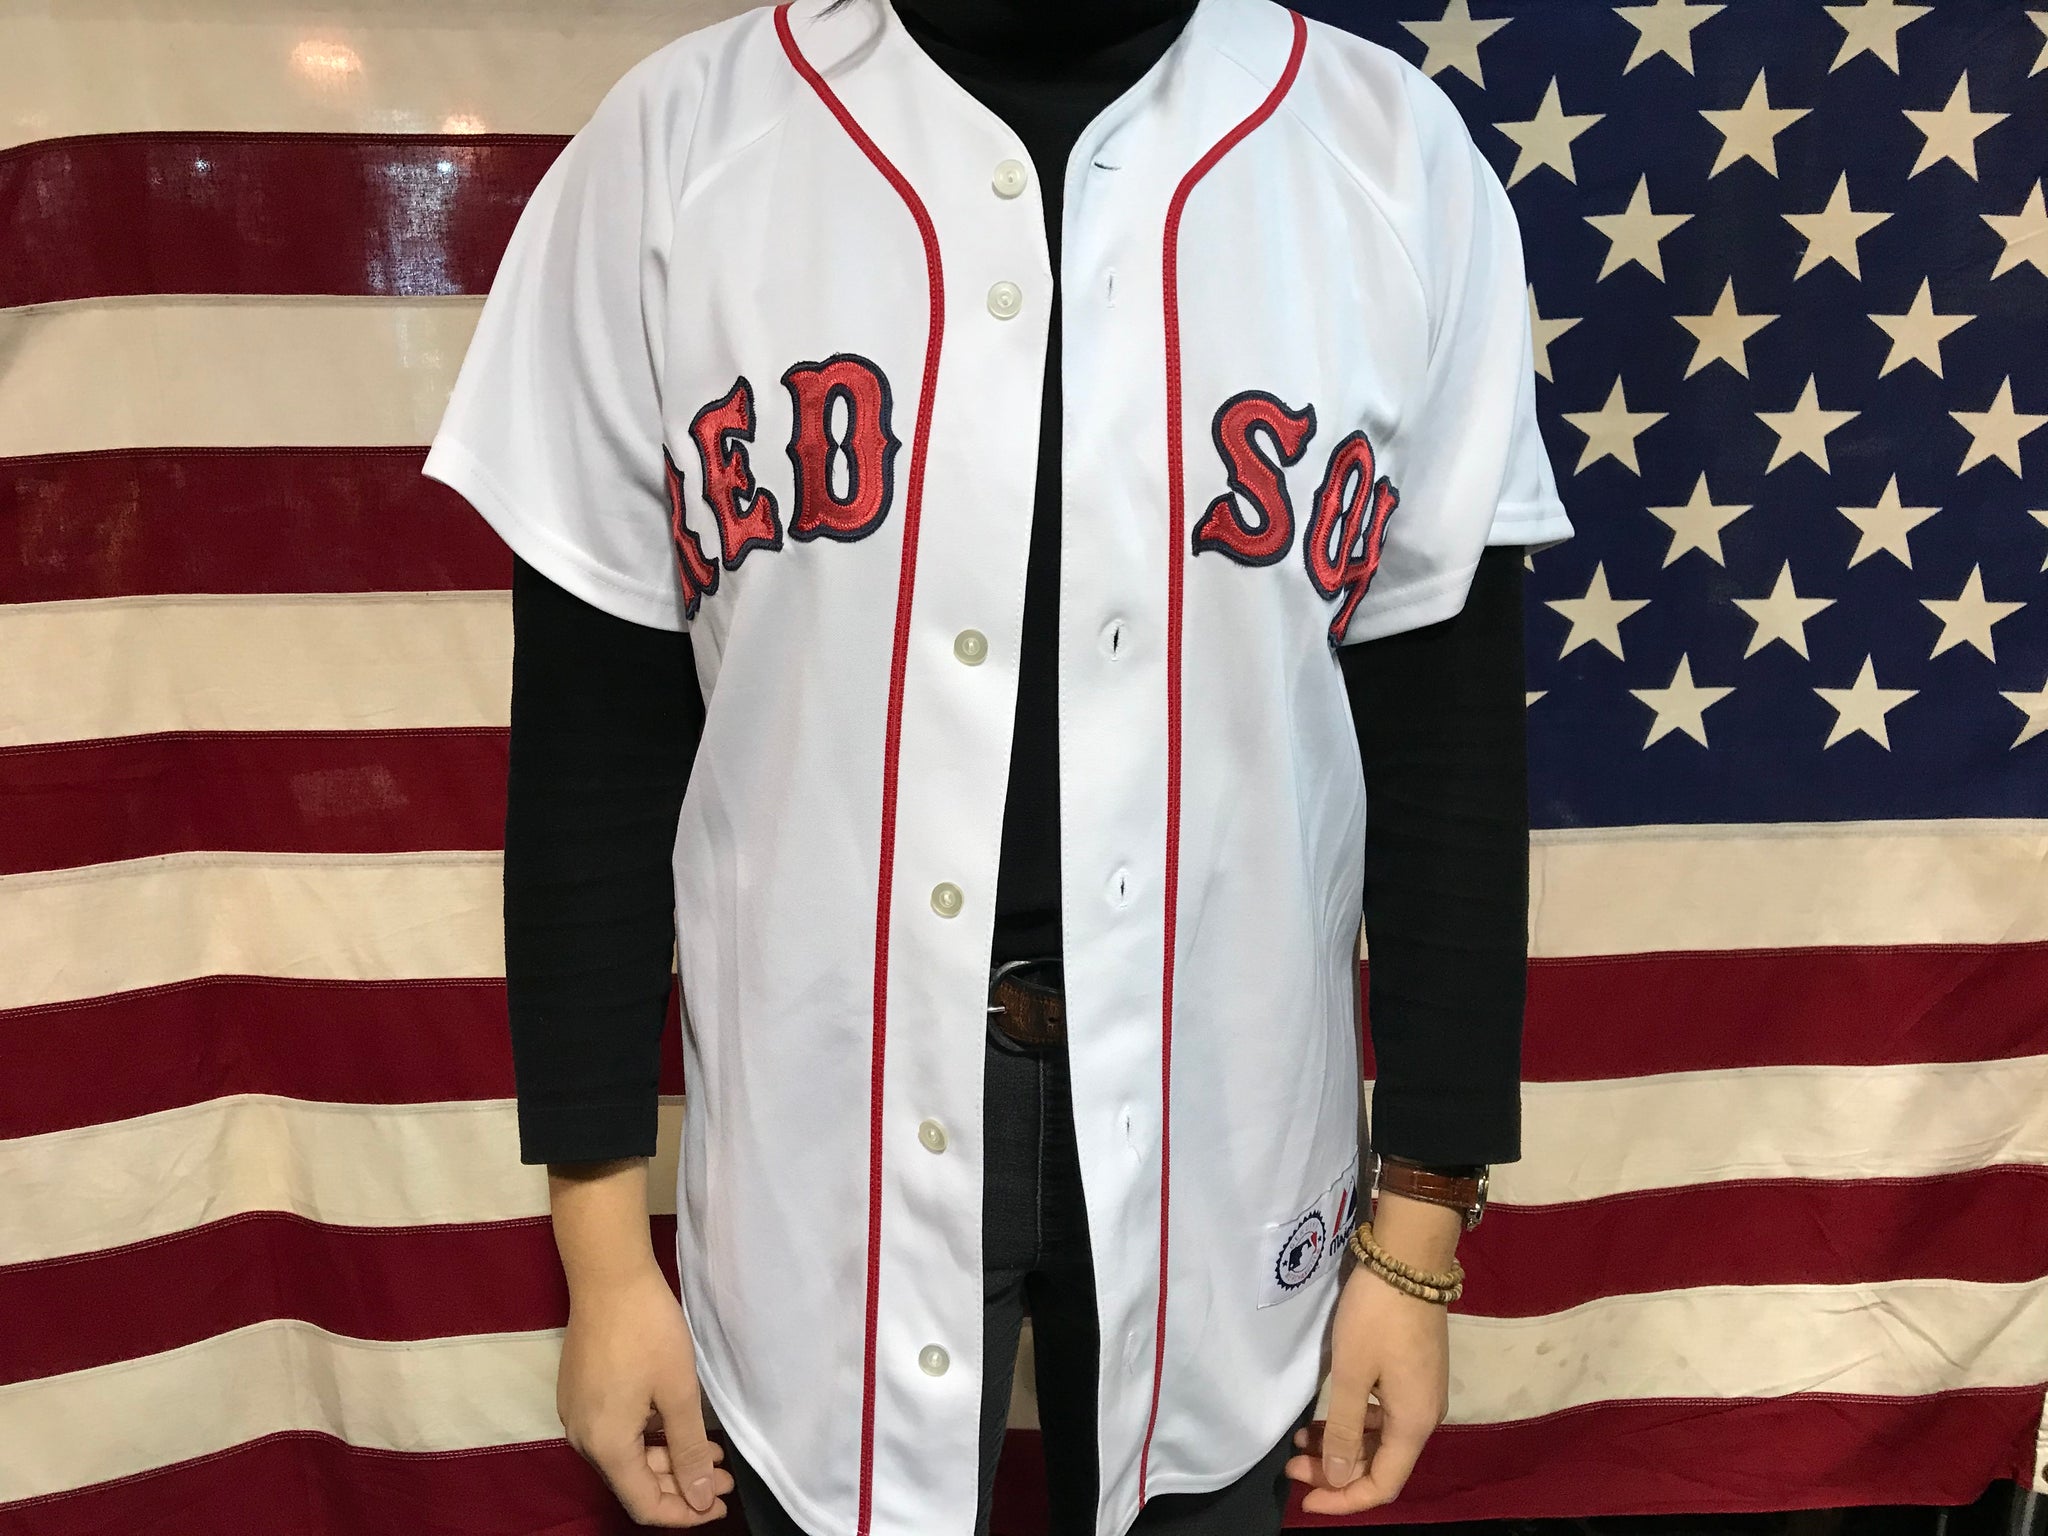 red sox jersey vintage